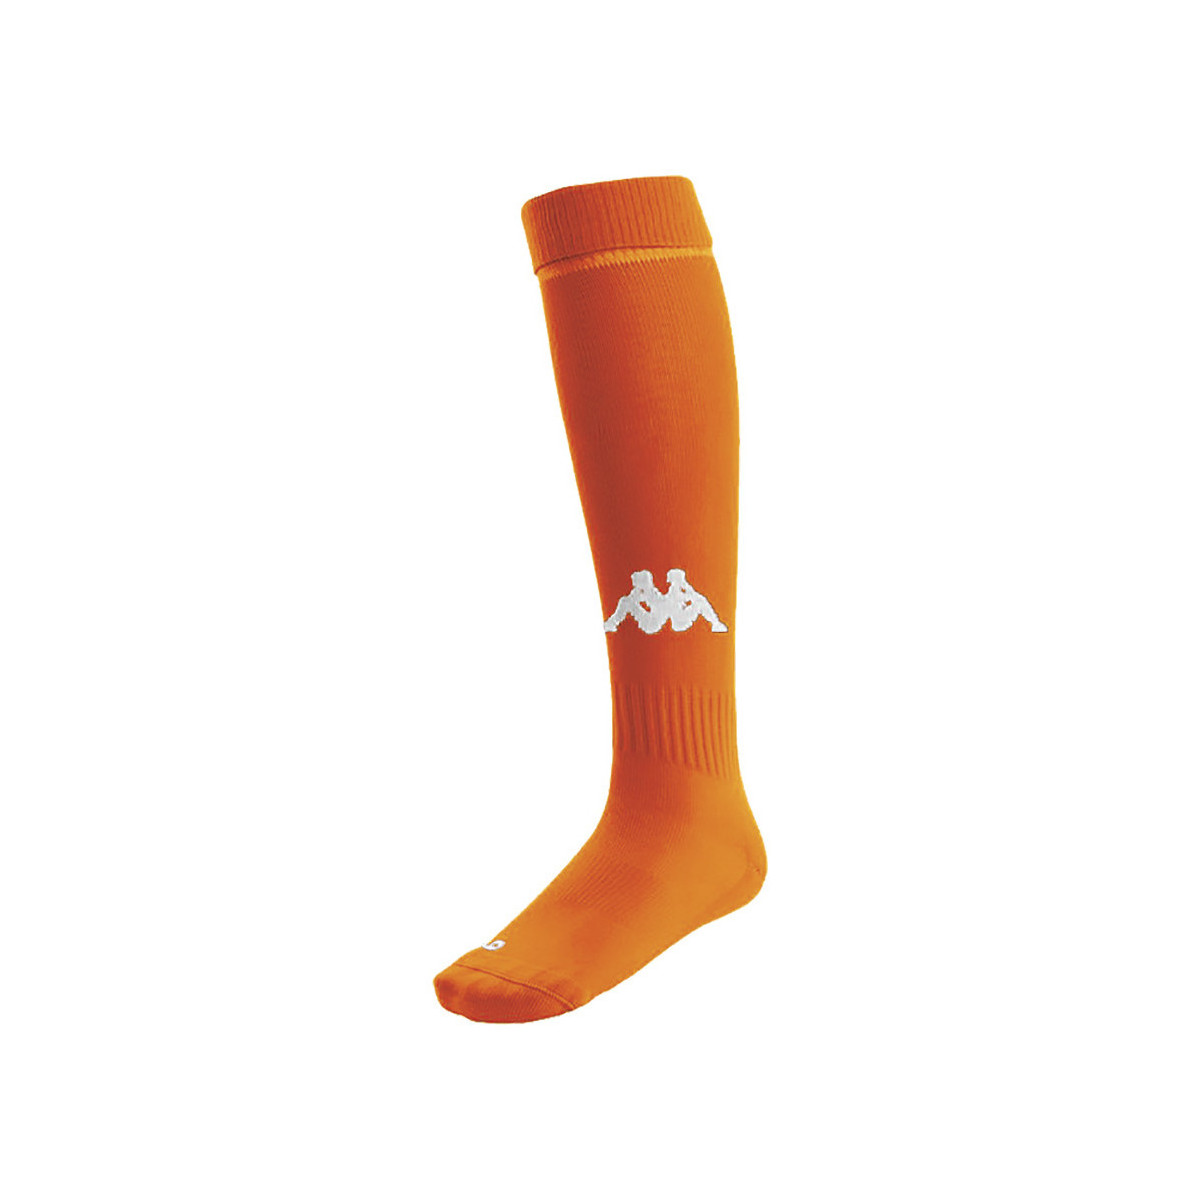 Kappa Orange Chaussettes Penao (3 paires) EjefWOxa